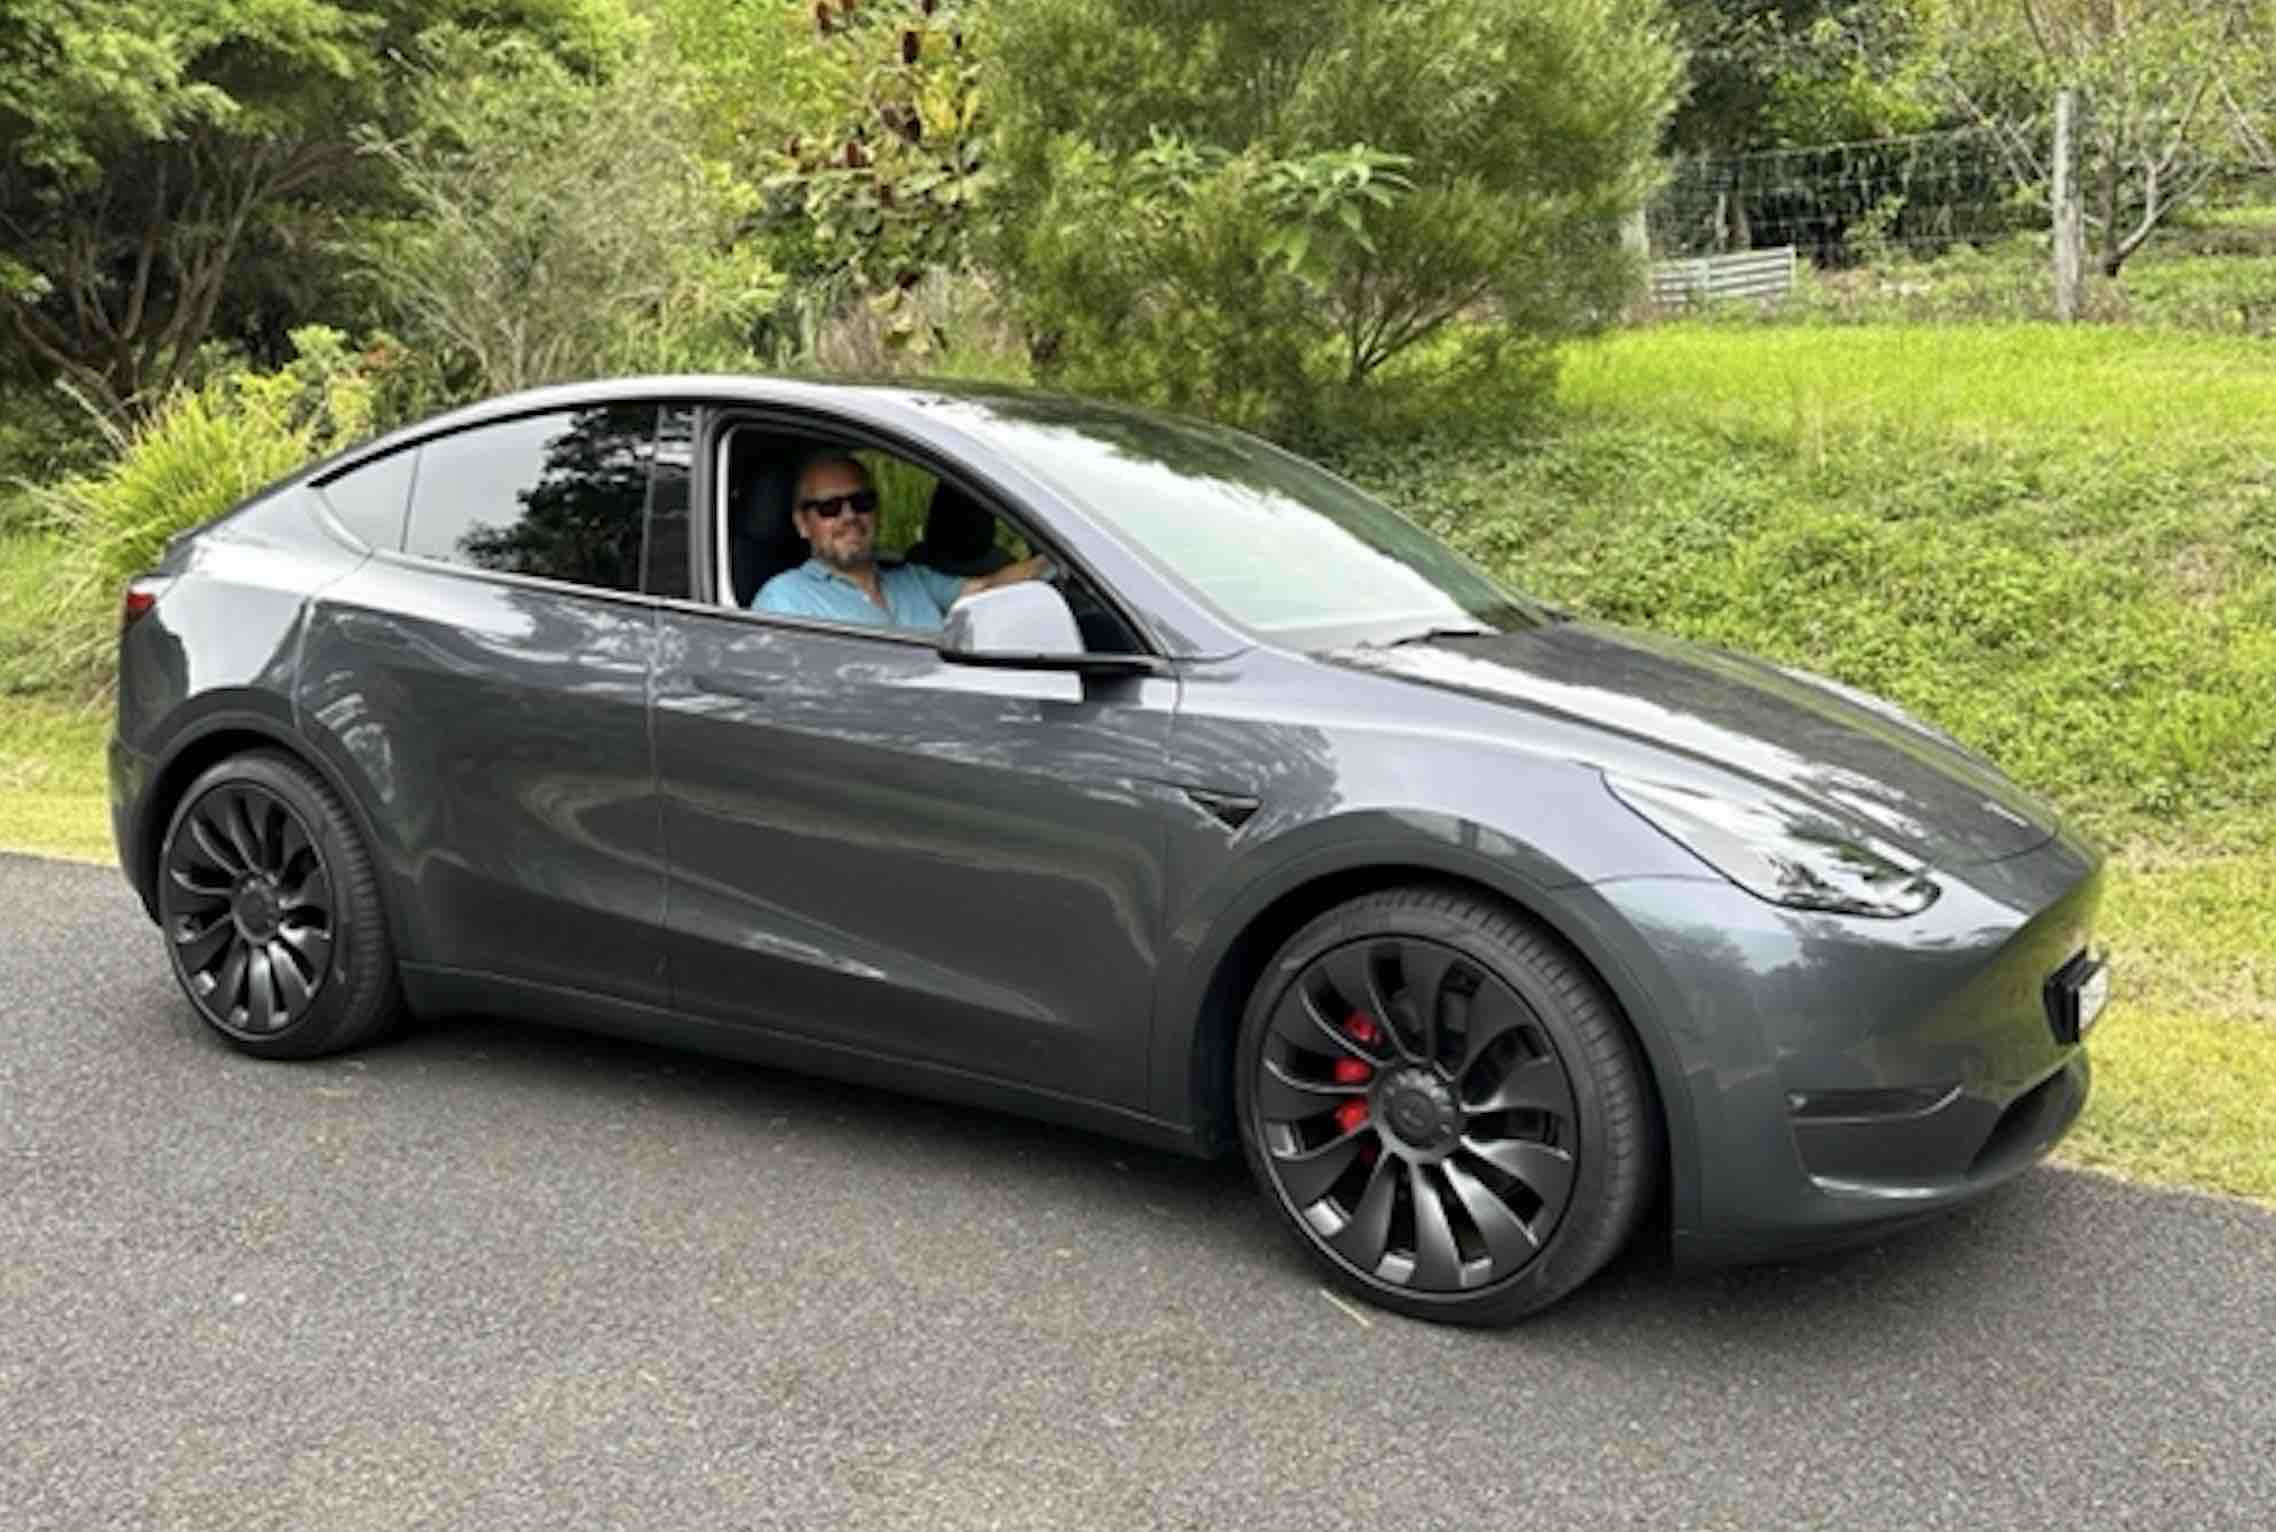 You've got to thump it: First drive in a Model Y Performance EV